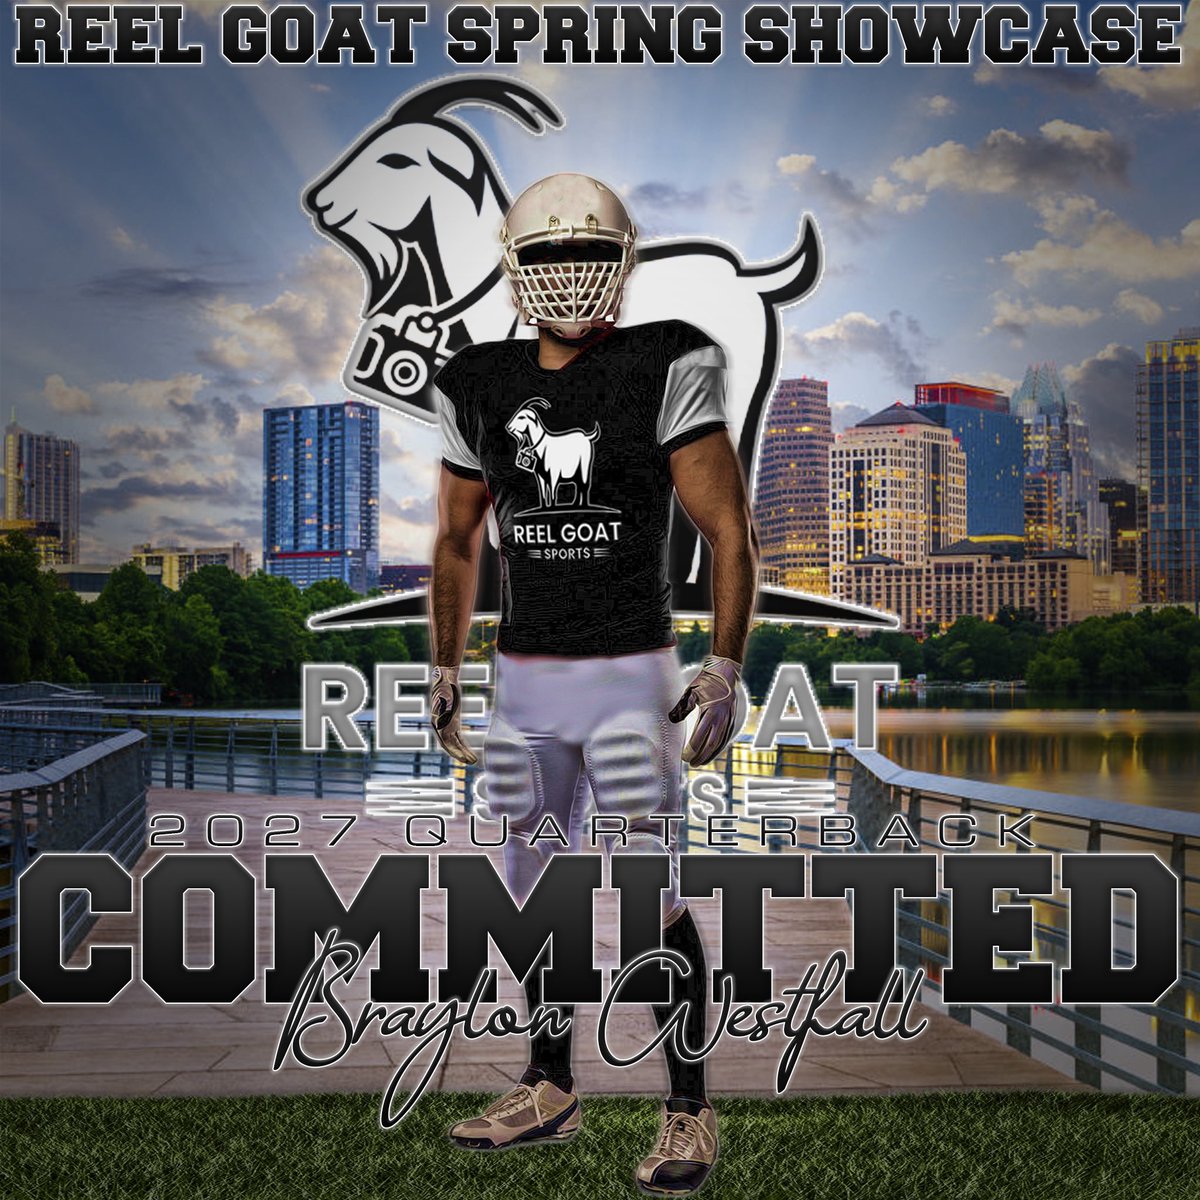 #AGTG I will be the only middle school kid attending this showcase. Excited to be 1 of 15 Quarterbacks to attend the biggest media exposure football showcase on June 24th! I will switch to receiver during 1 on 1’s! @reelgoatsports @GTEagleFootball